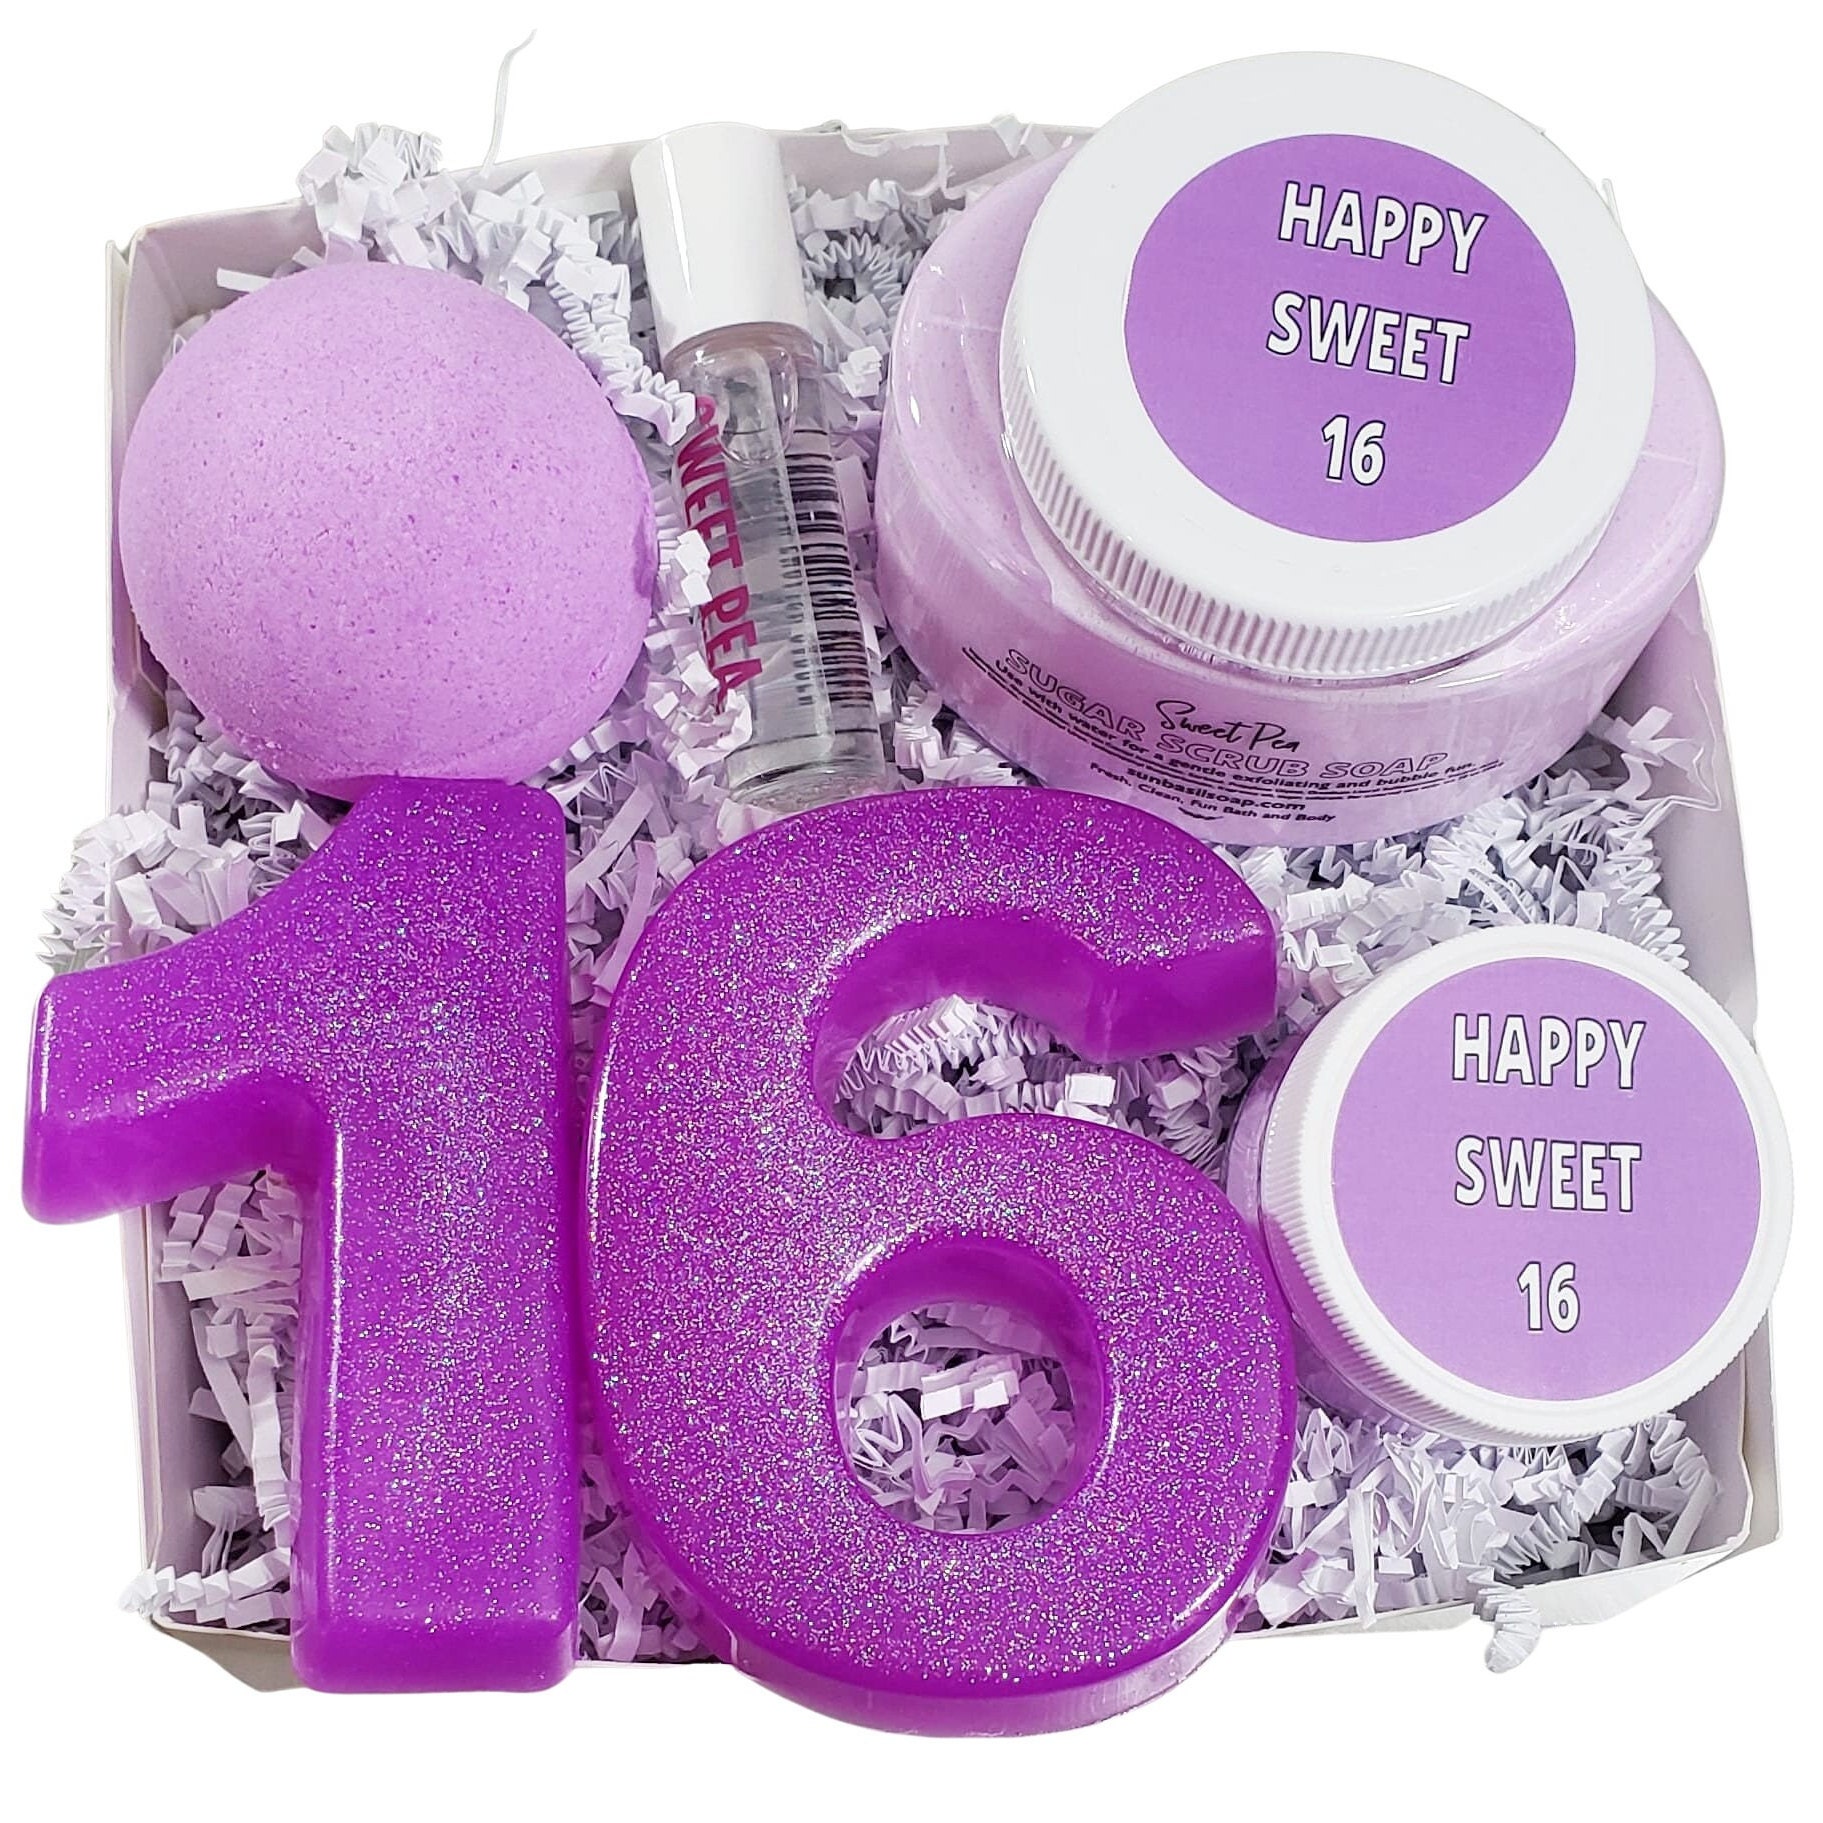 Sweet 16 Gifts for Girls, 16th Birthday Gifts for Girls, Gifts for 16 Year  Old Girls, Sweet Sixteen Gifts for Girls, 16th Birthday Decorations for